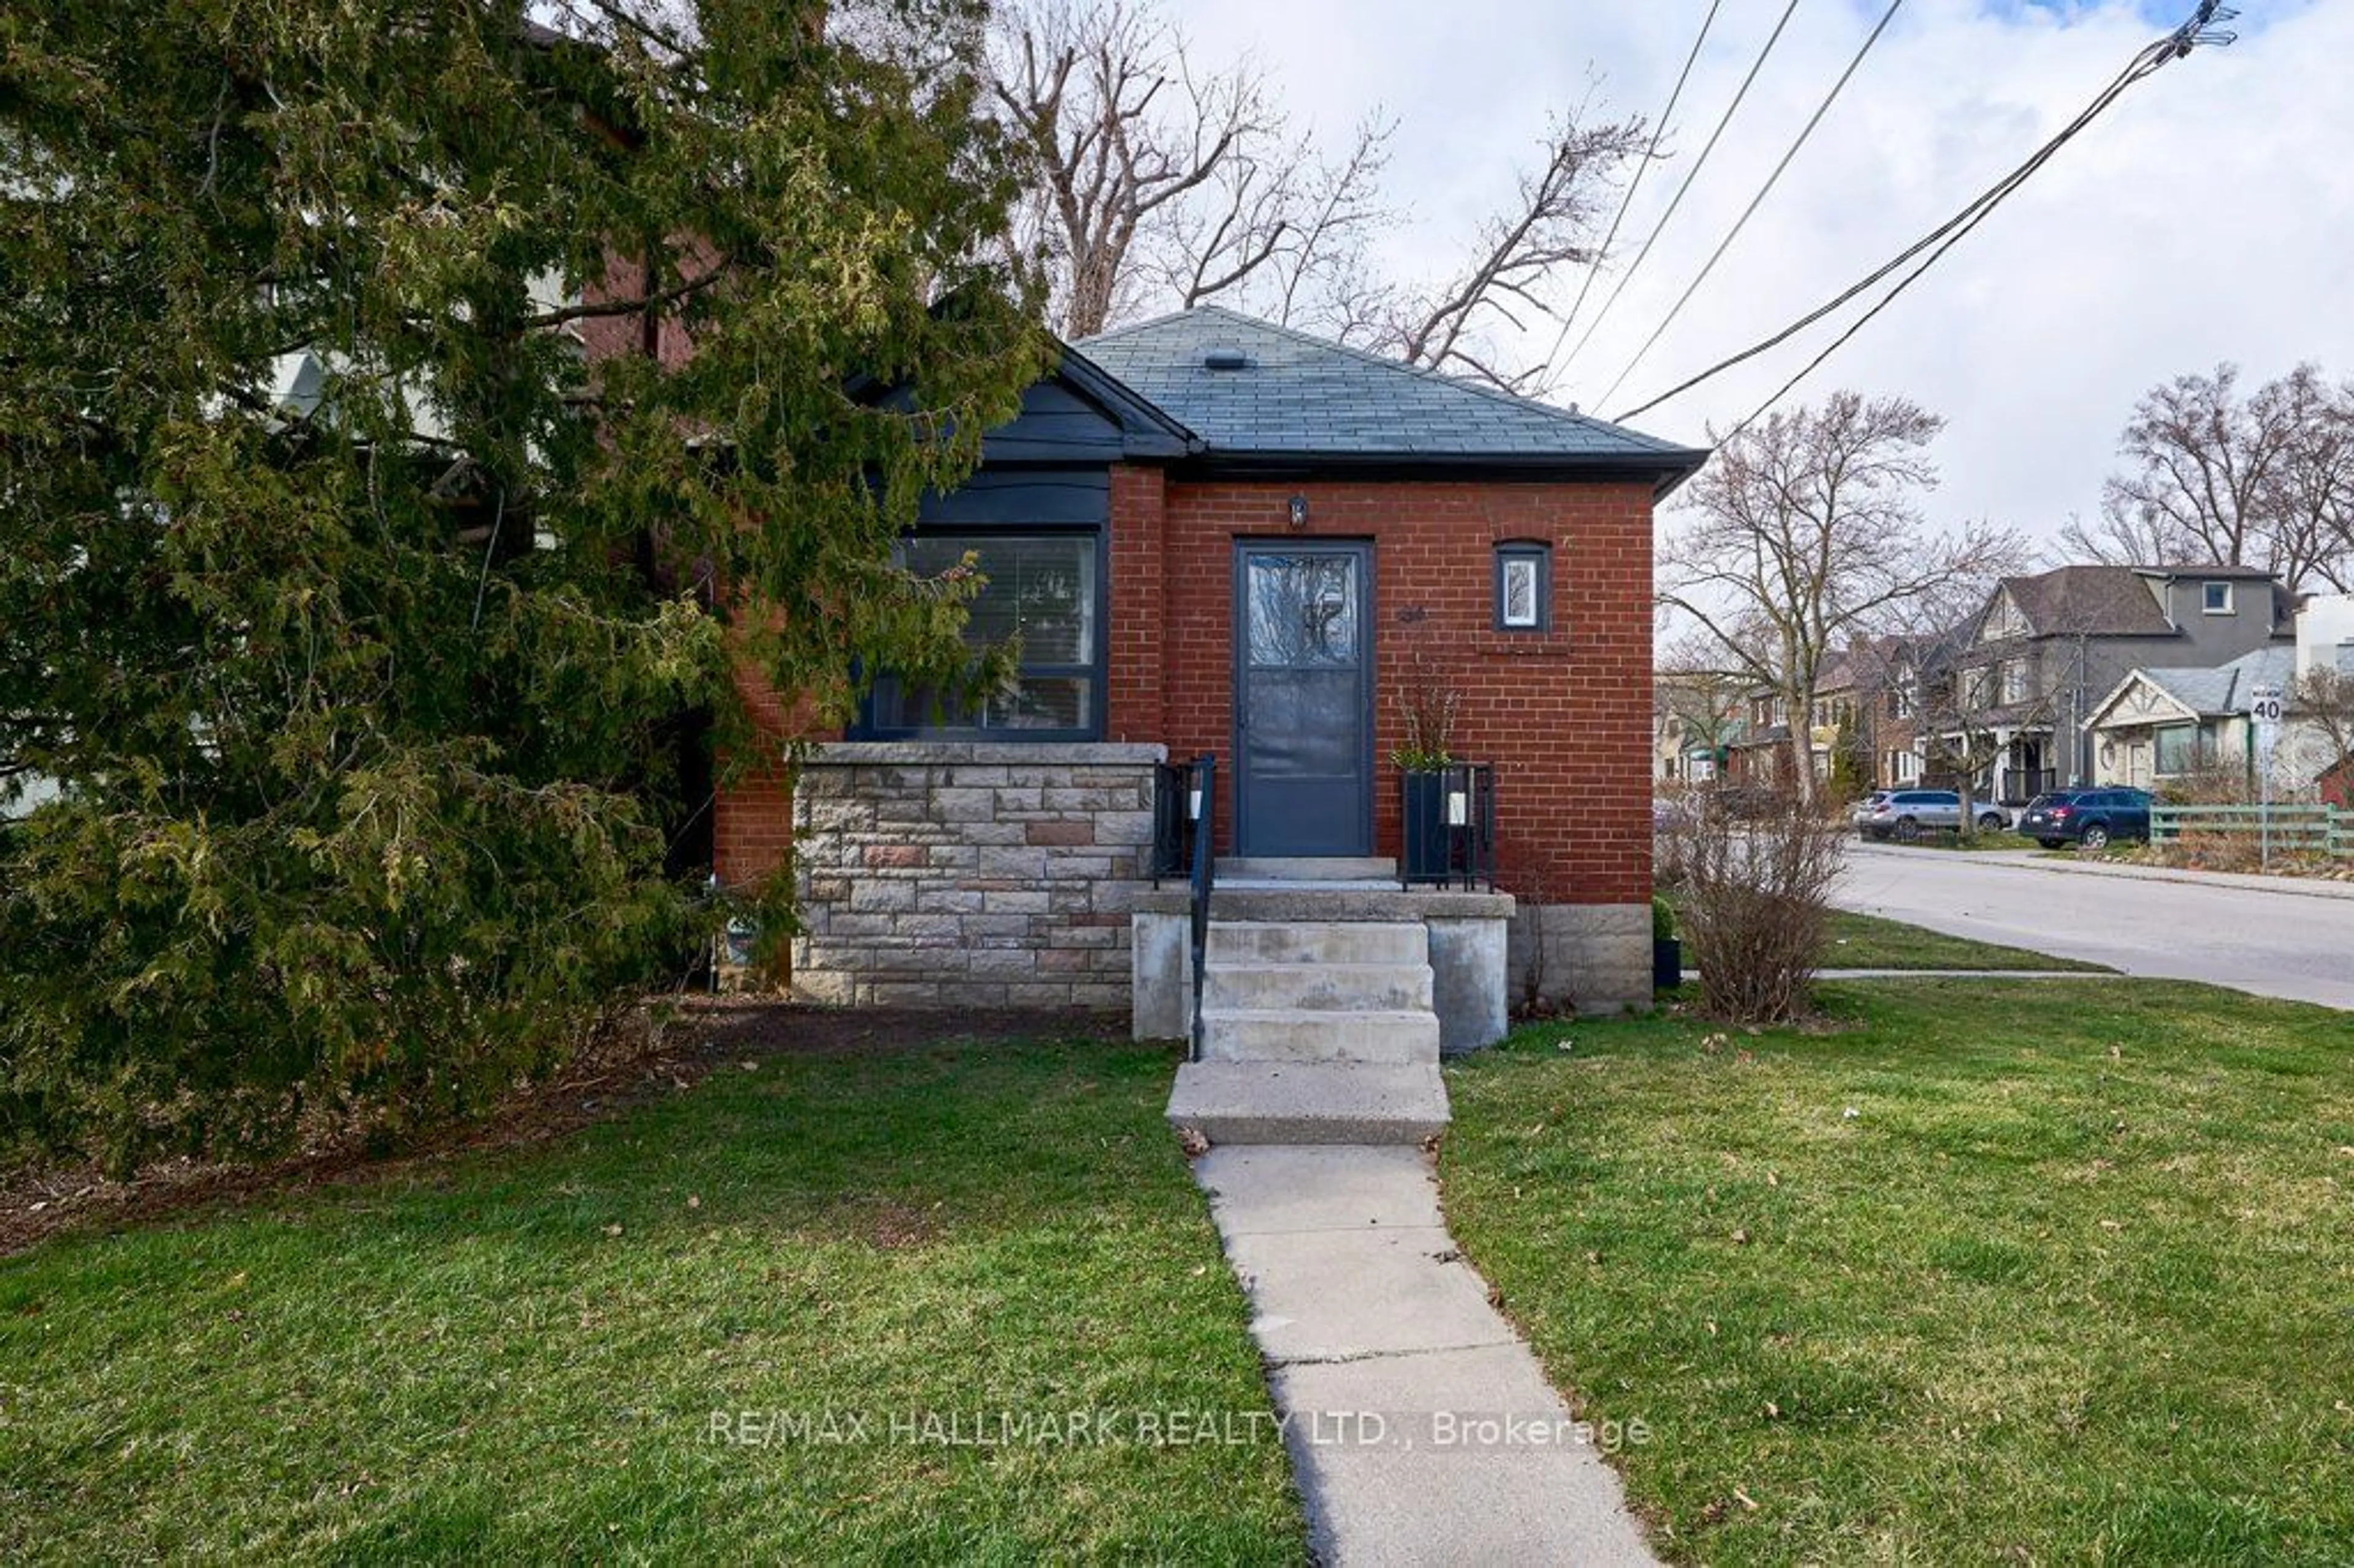 Home with brick exterior material for 34 Gloucester Grve, Toronto Ontario M6C 2A1